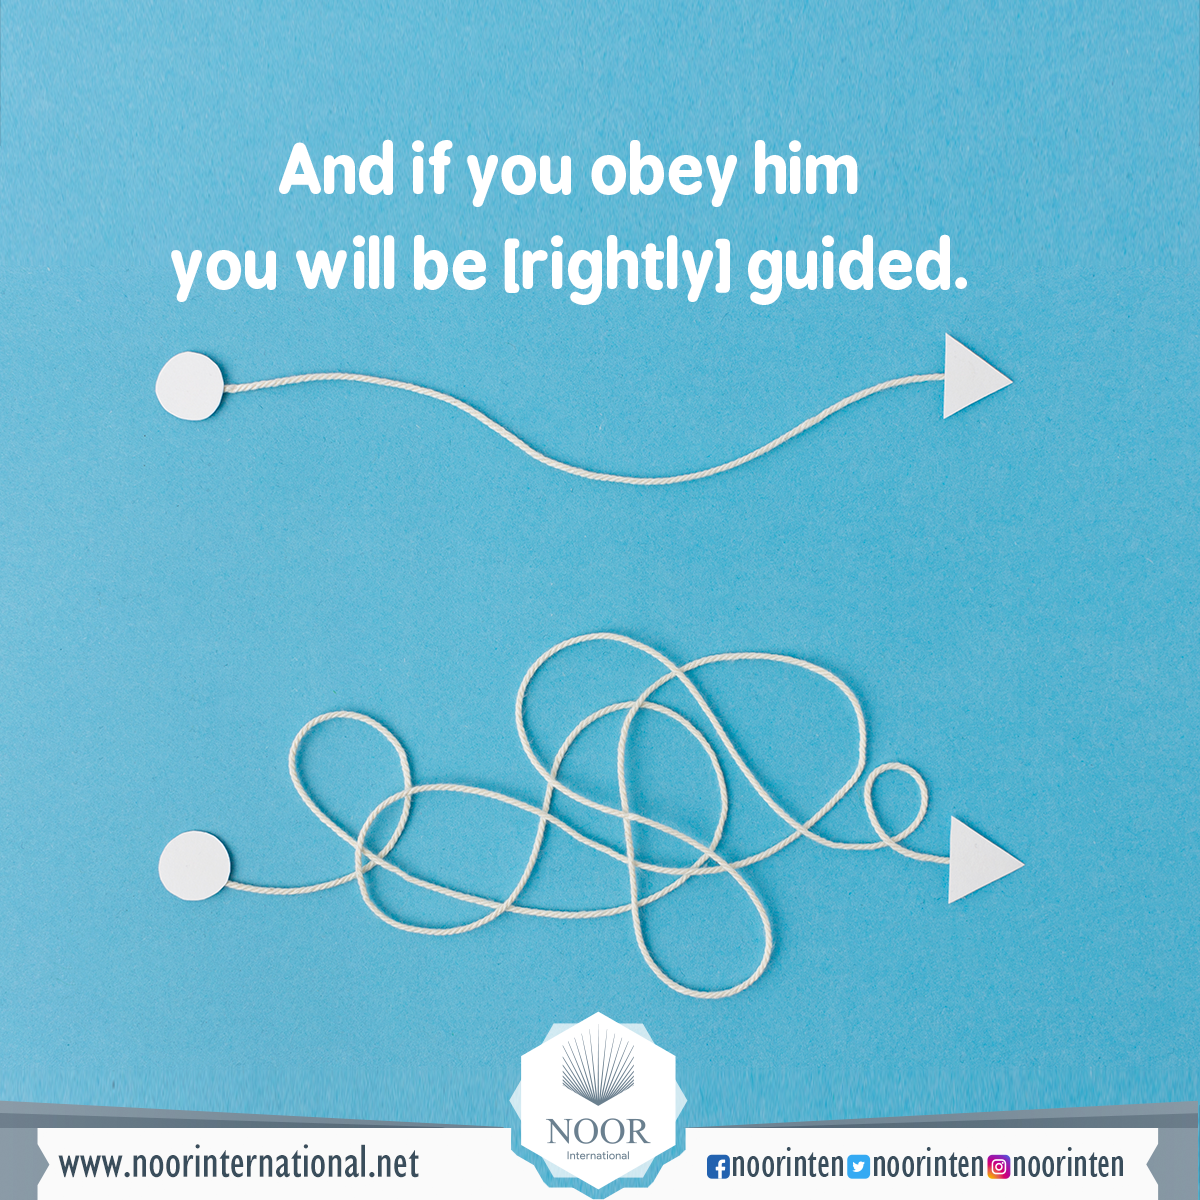 And if you obey him, you will be [rightly] guided.